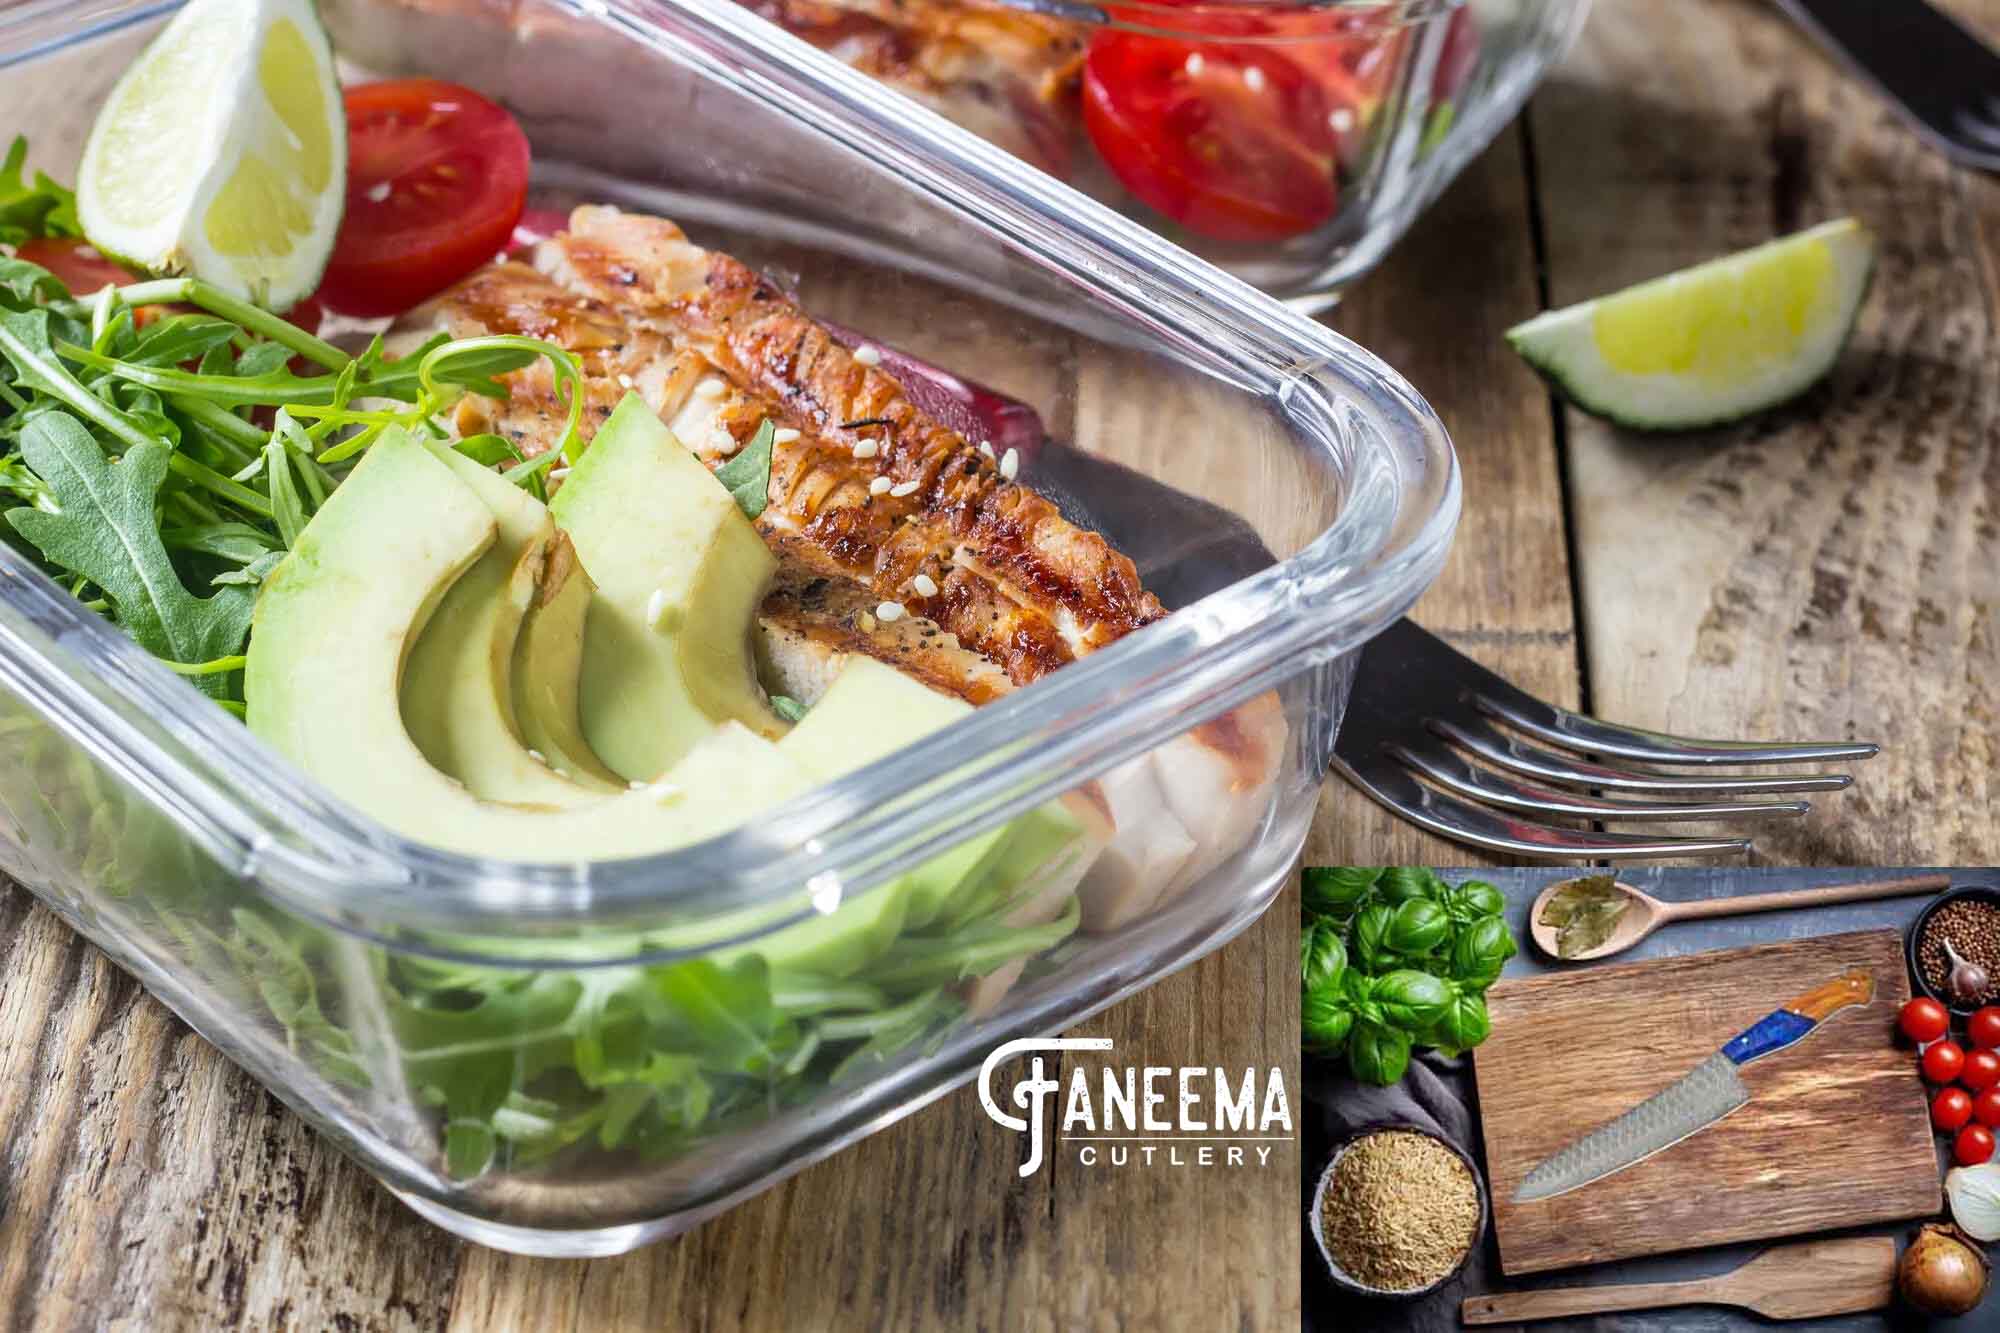 Faneema Cutlery Introduces Guide to Simplify Meal Prep for Healthy Eating